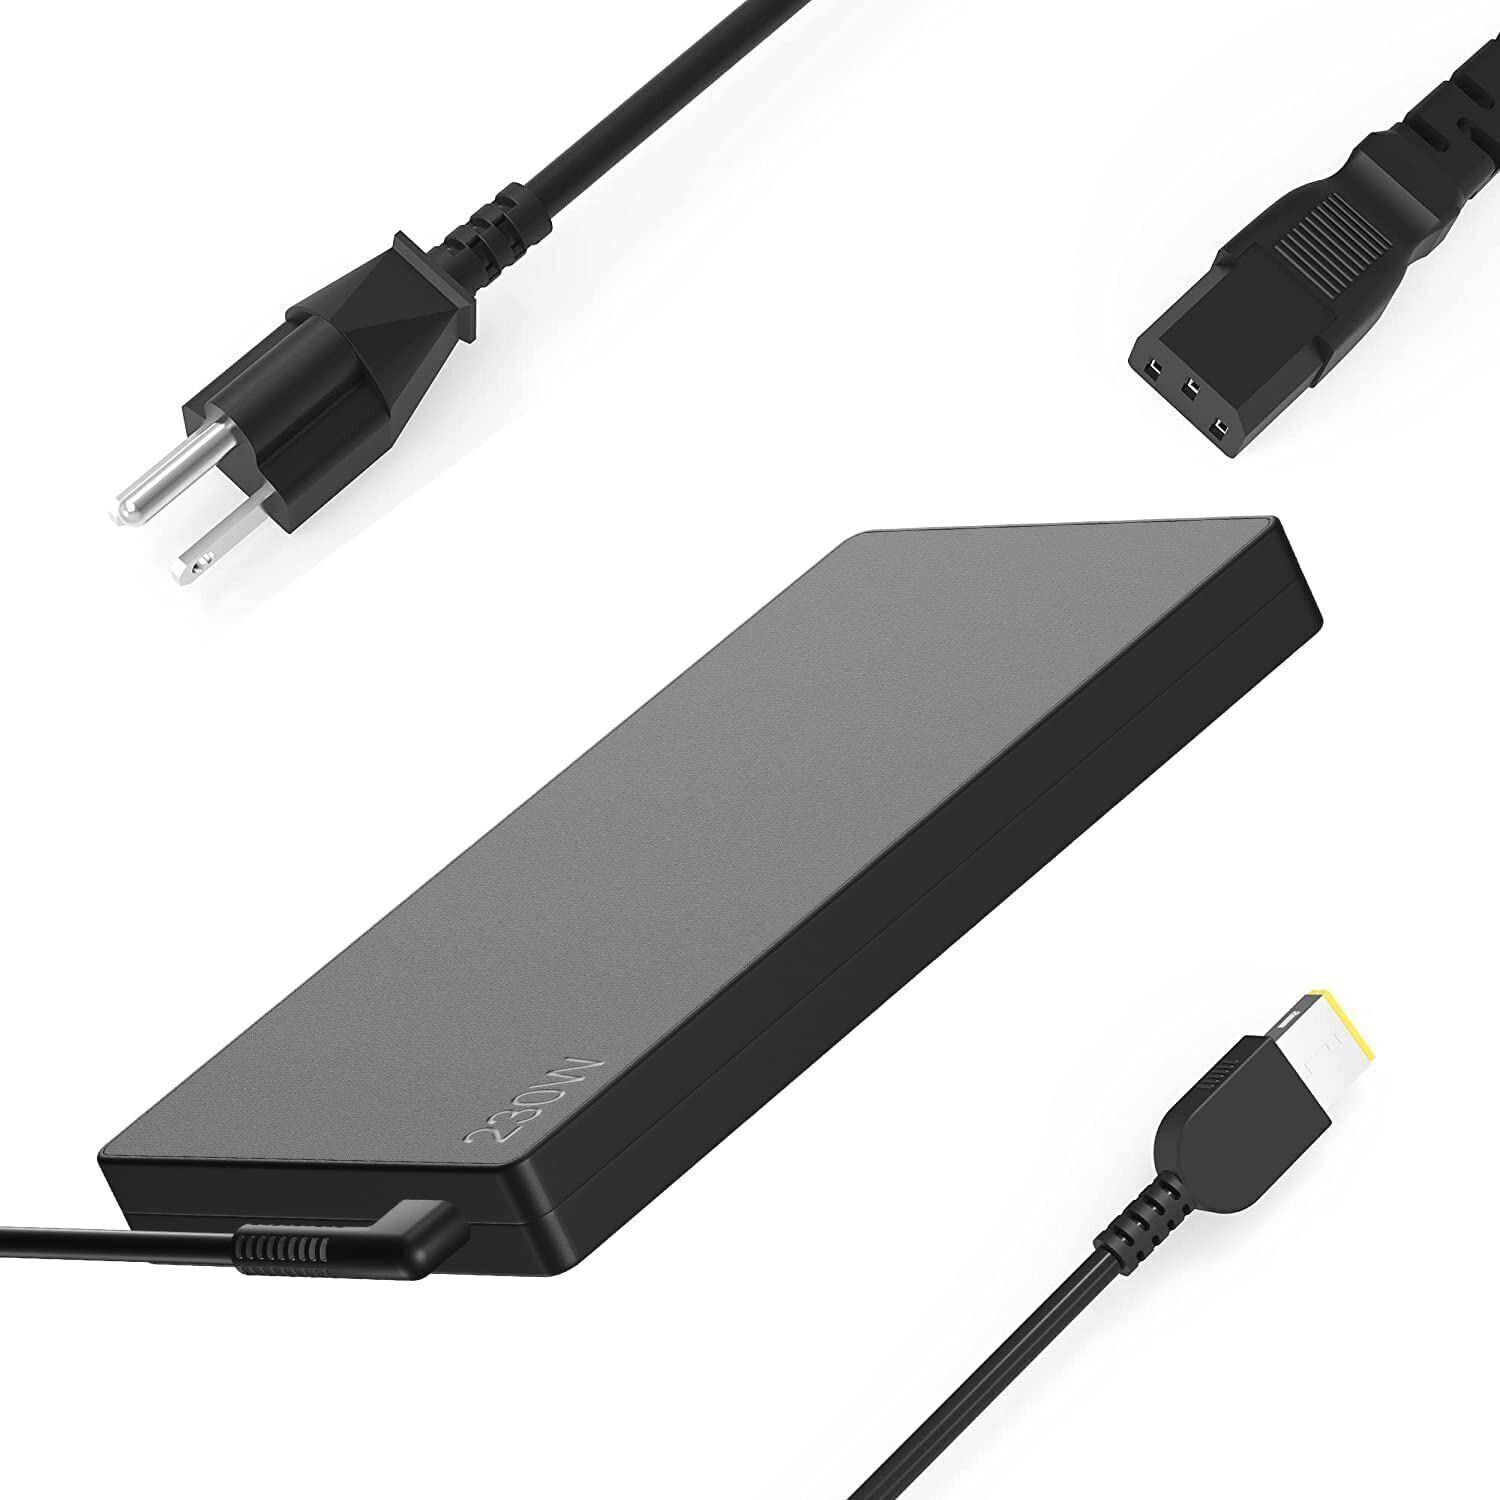 230W Slim Charger For Lenovo Legion 5/7/5P/C7/Y900 Laptop Power Supply Adapter